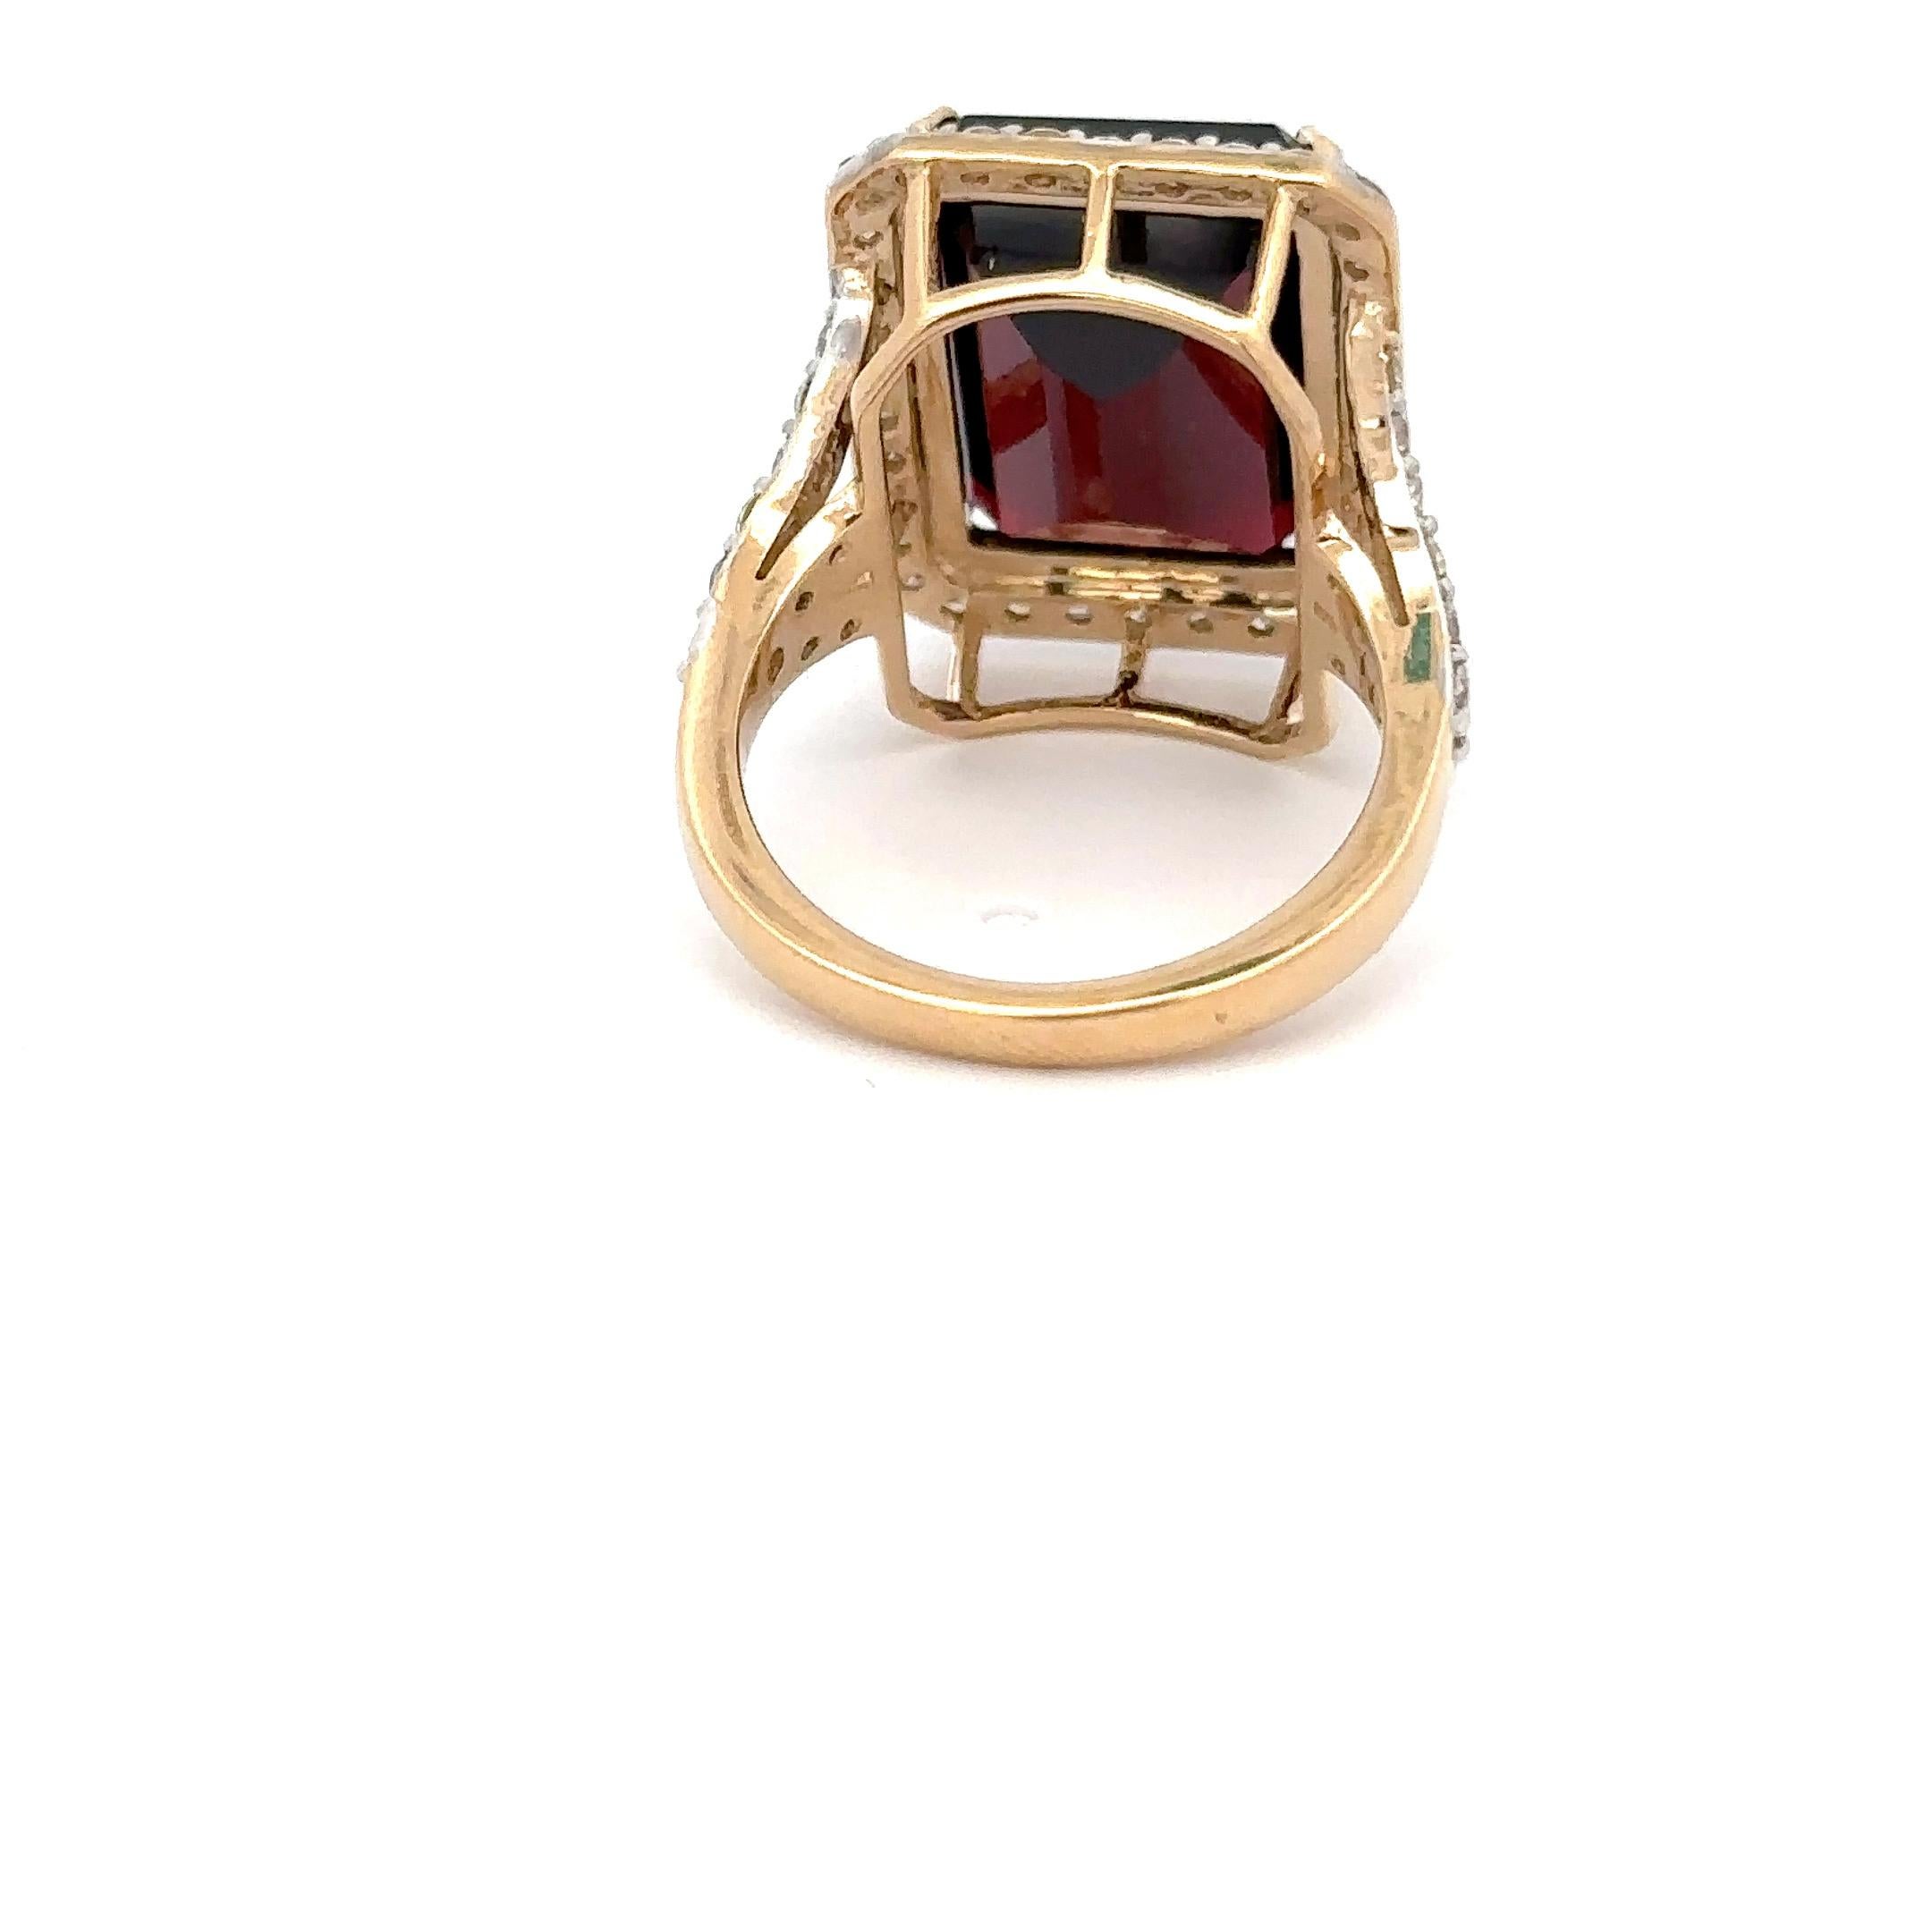 For Sale:  Large 14.54 Ct Garnet Diamond Cocktail Ring in 14k Solid Yellow Gold Certified 8